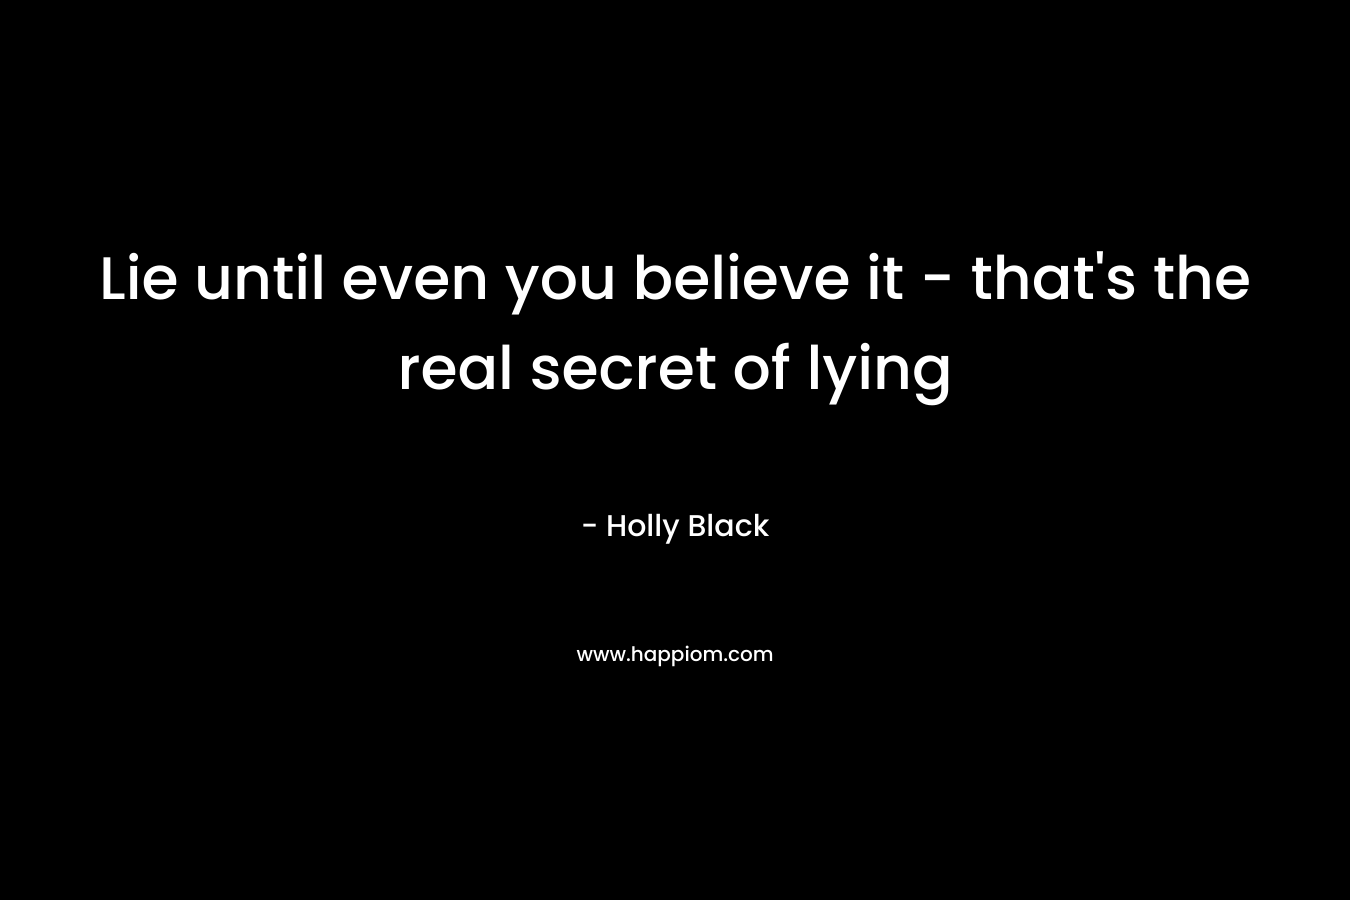 Lie until even you believe it - that's the real secret of lying